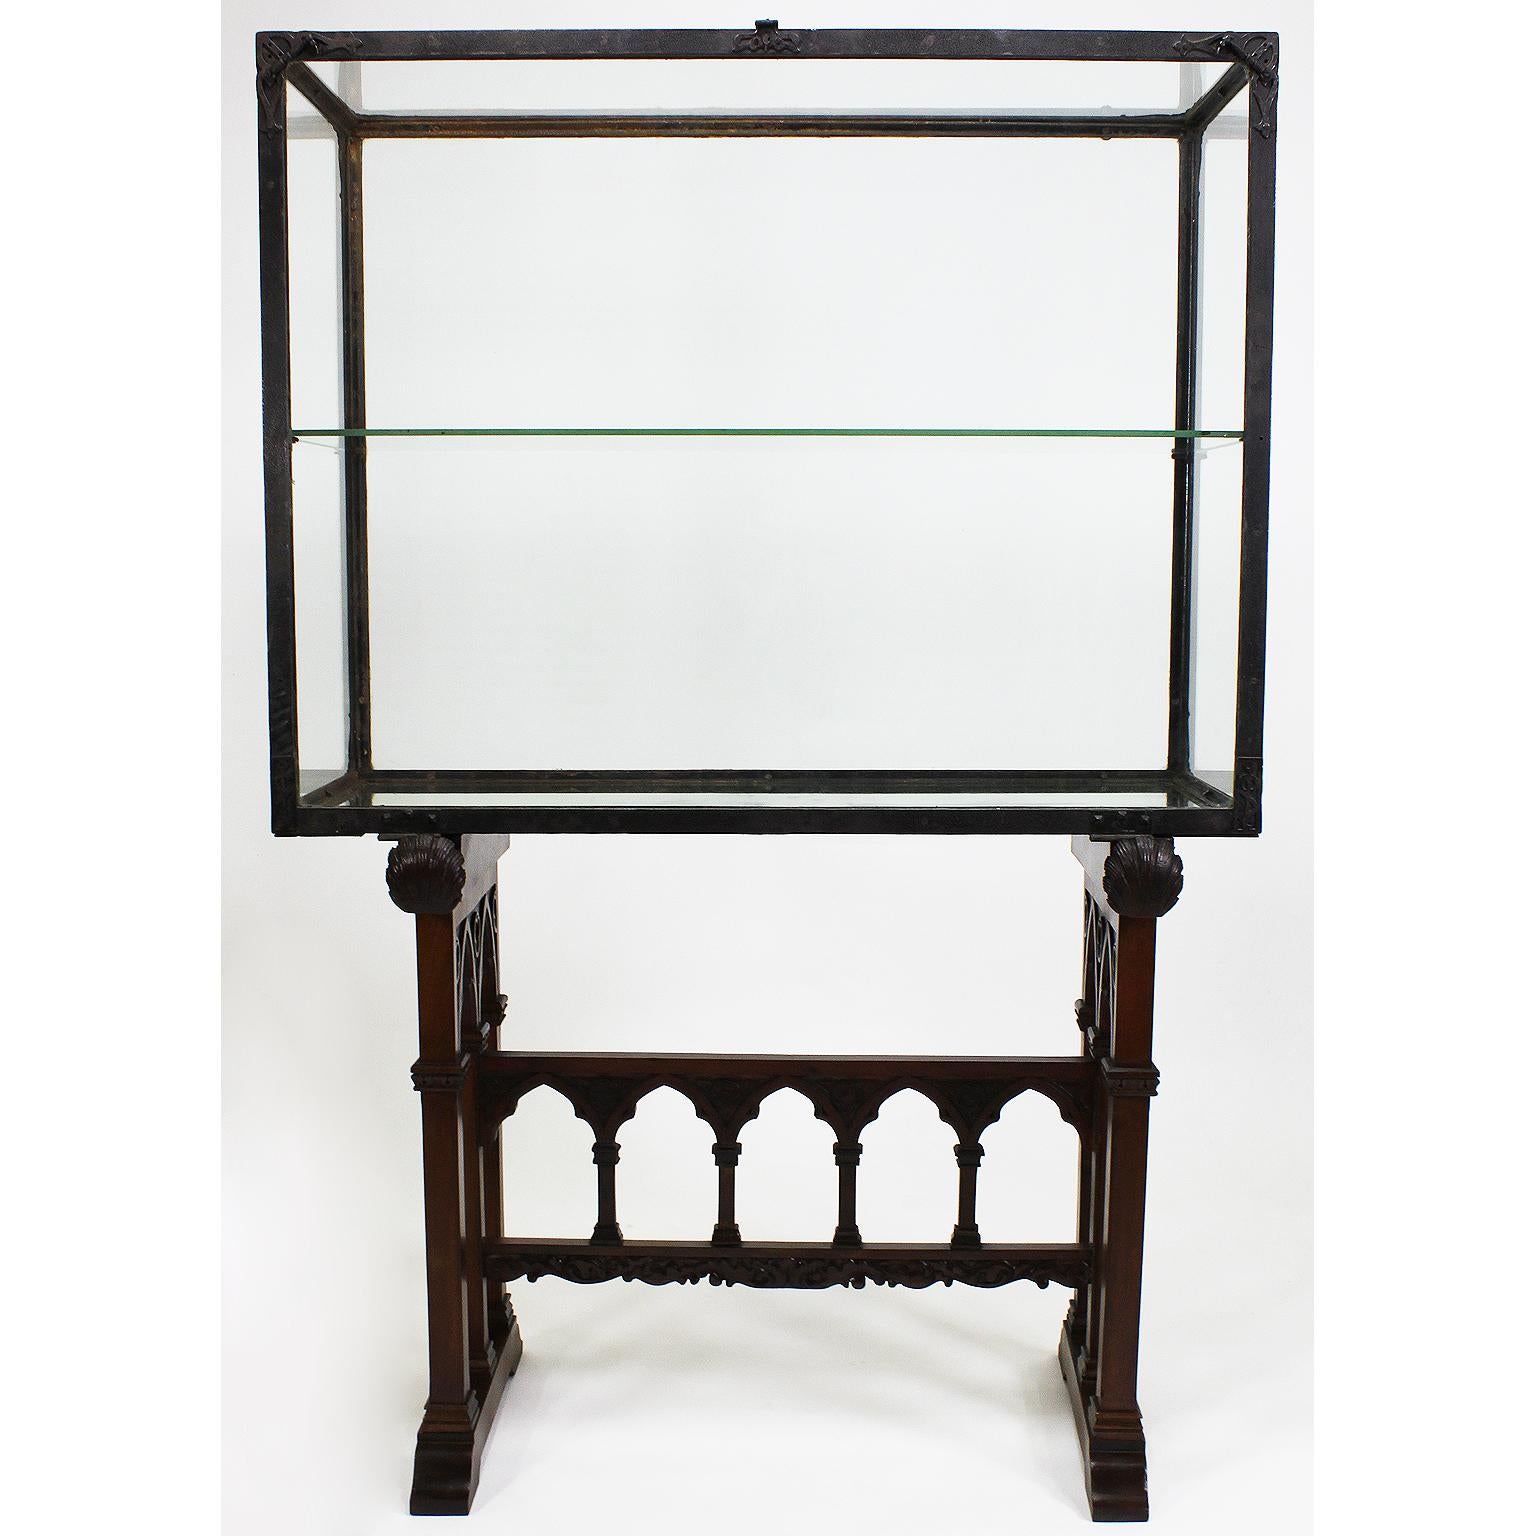 A Rare Spanish 19th-20th century Gothic Revival Baroque style carved mahogany and forged iron vitrine cabinet on stand. The rectangular hammered iron drop-front exhibition, display or jewelry cabinet with corner lock-hooks and a padlock-ready latch,